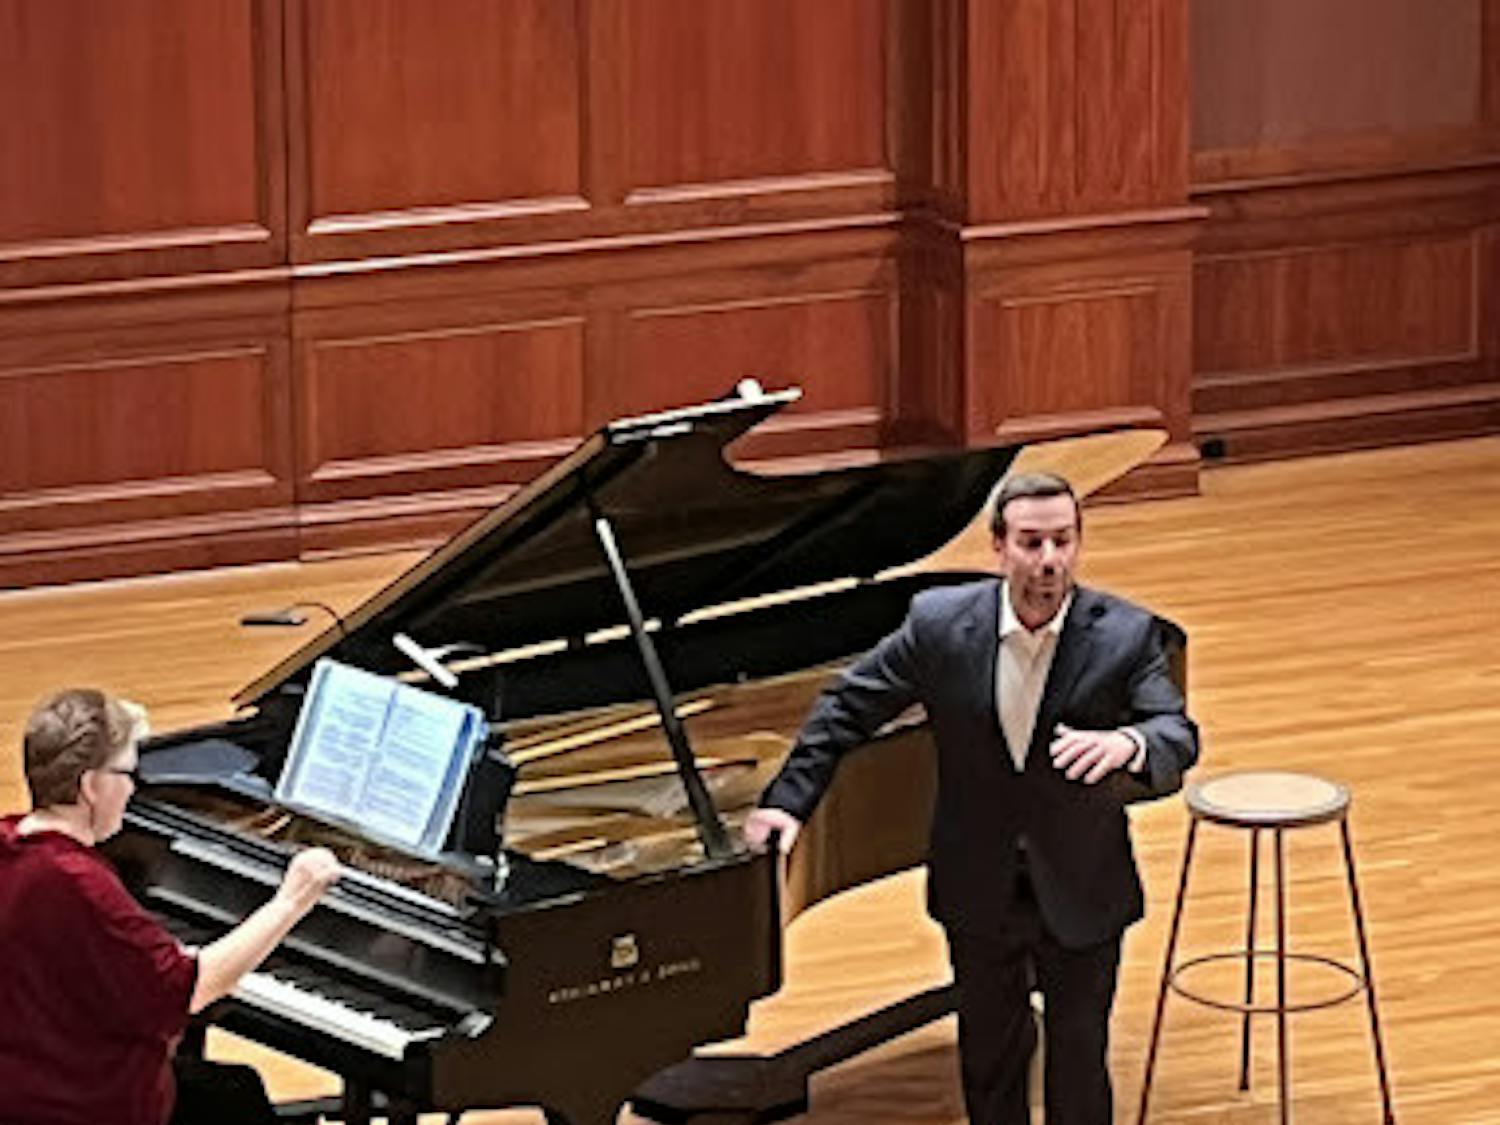 Pianist Laura Ward (pictured left) plays piano while Steven Eddy (pictured right) sings on stage (Photo courtesy of Jayleen Rolon).